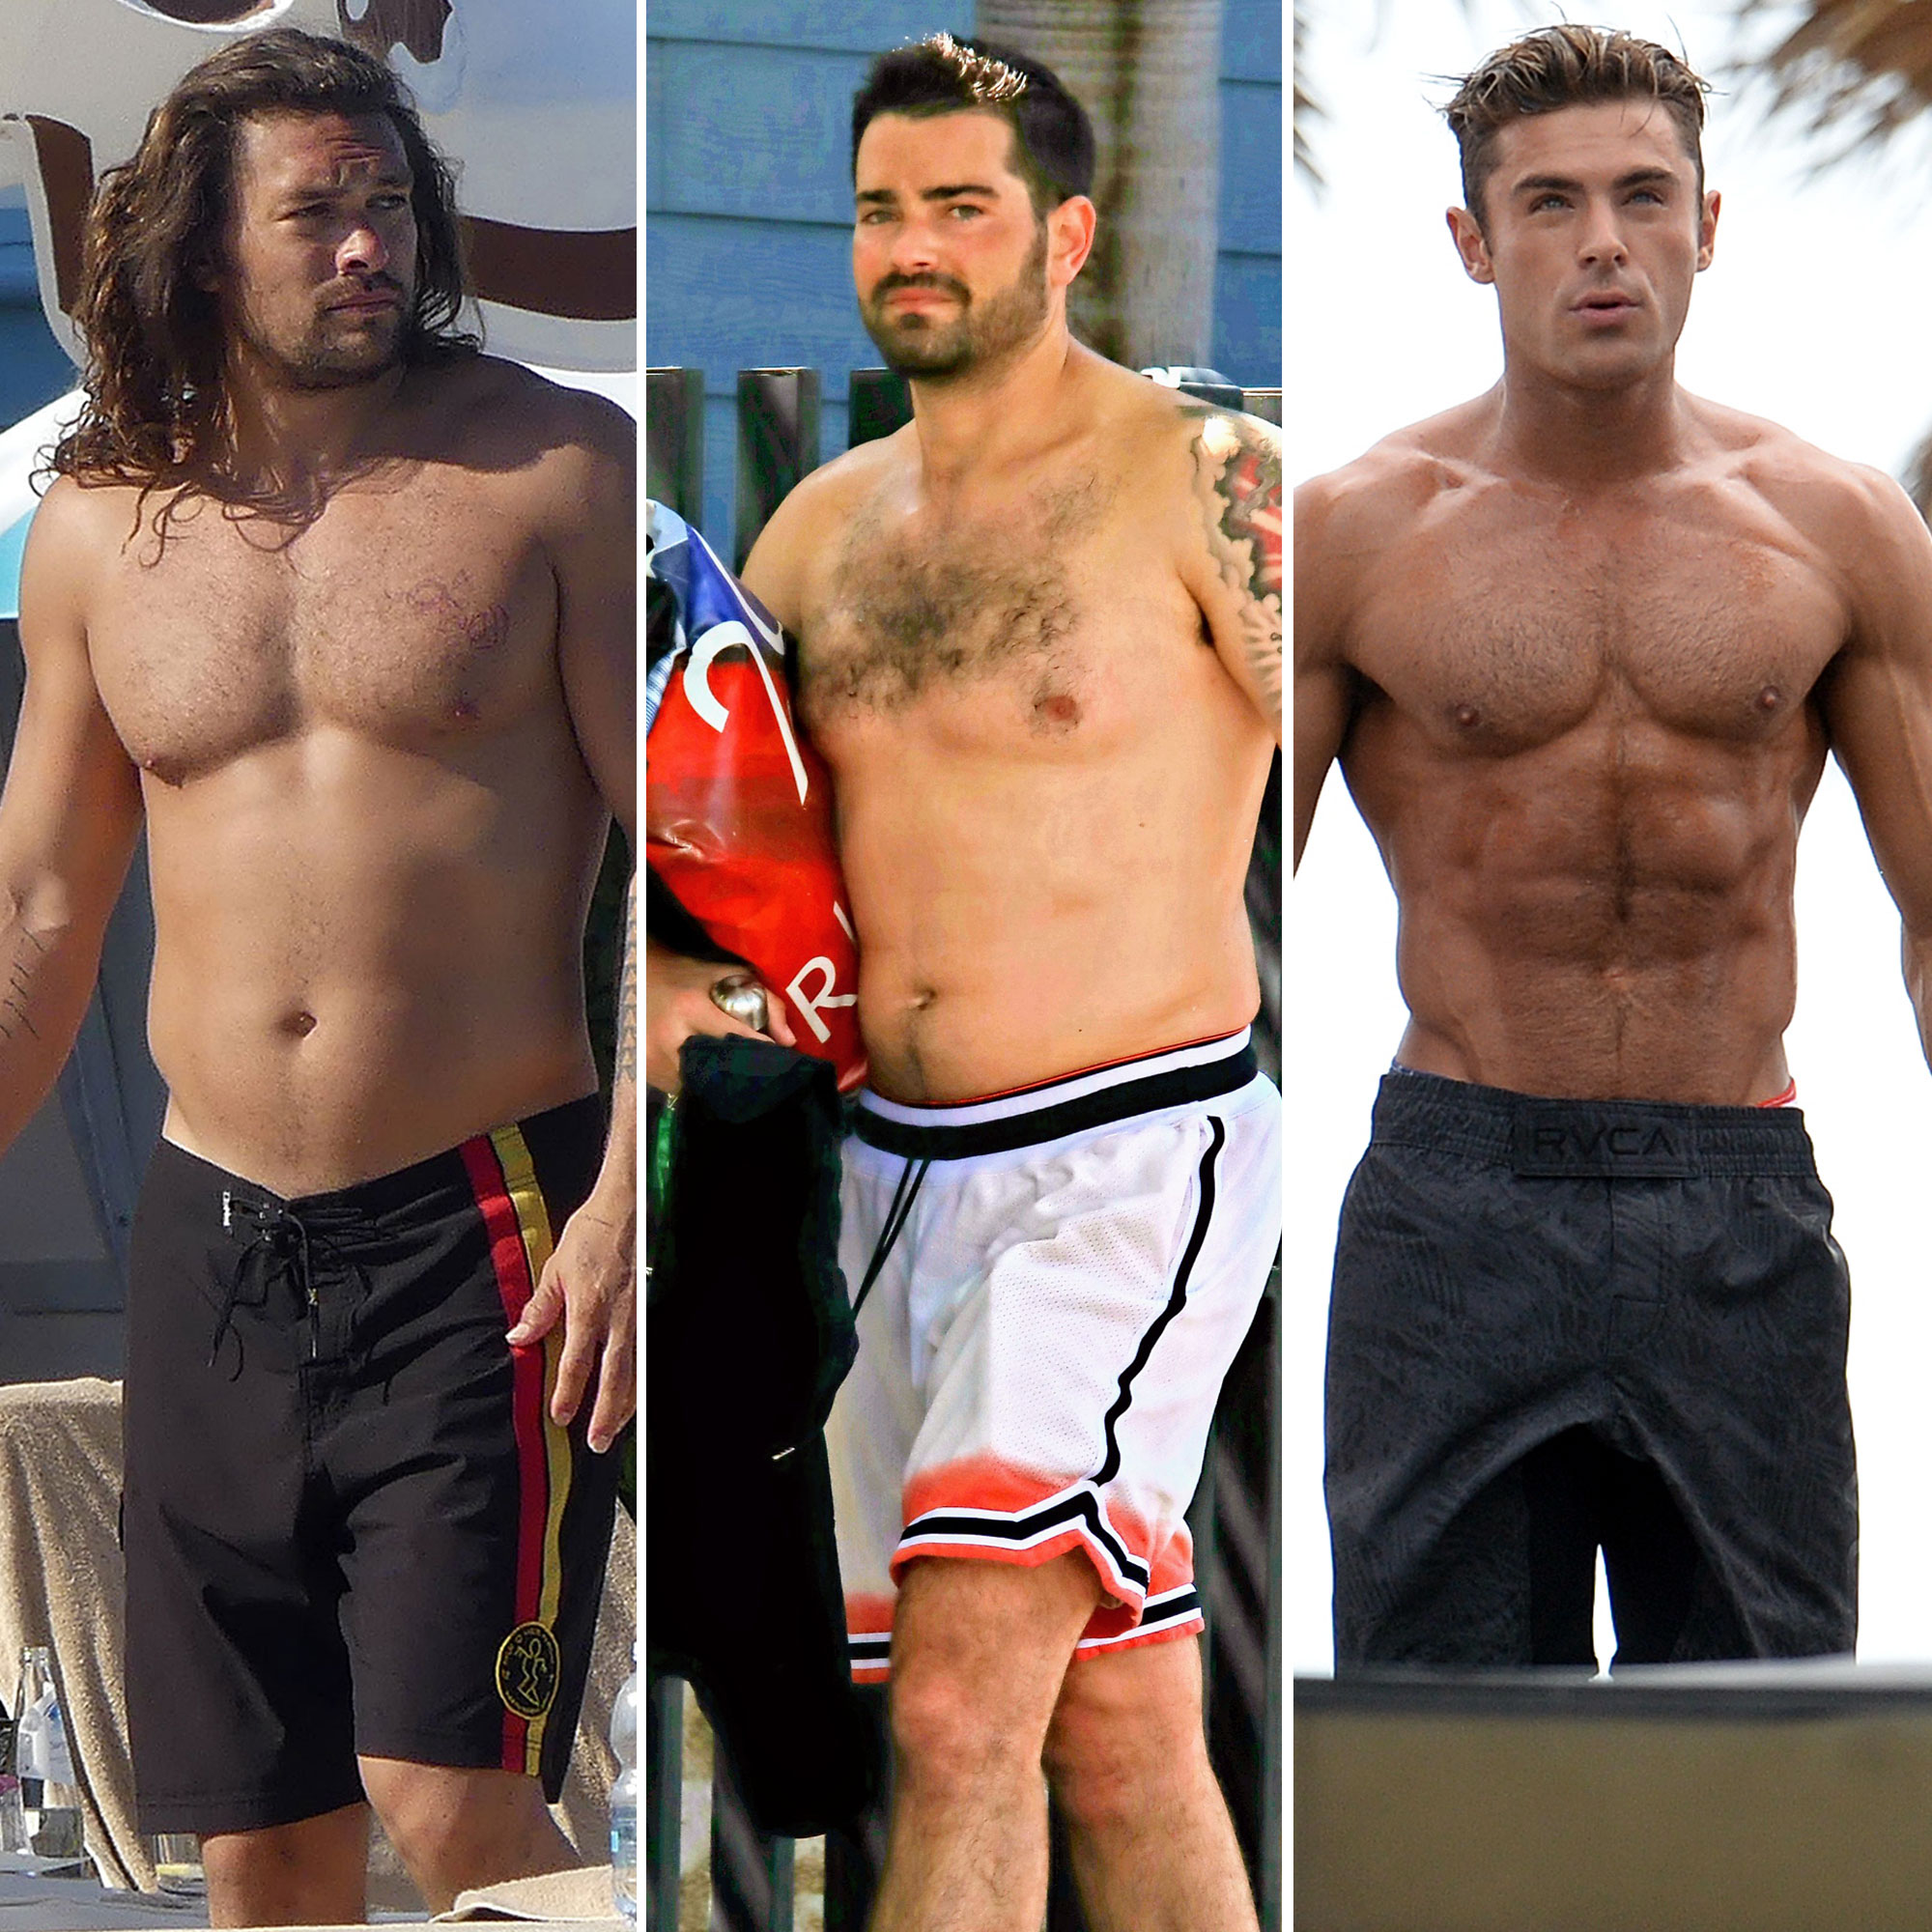 Hollywoods Hottest Hunks Go Shirtless, Show Off Physiques Pics image